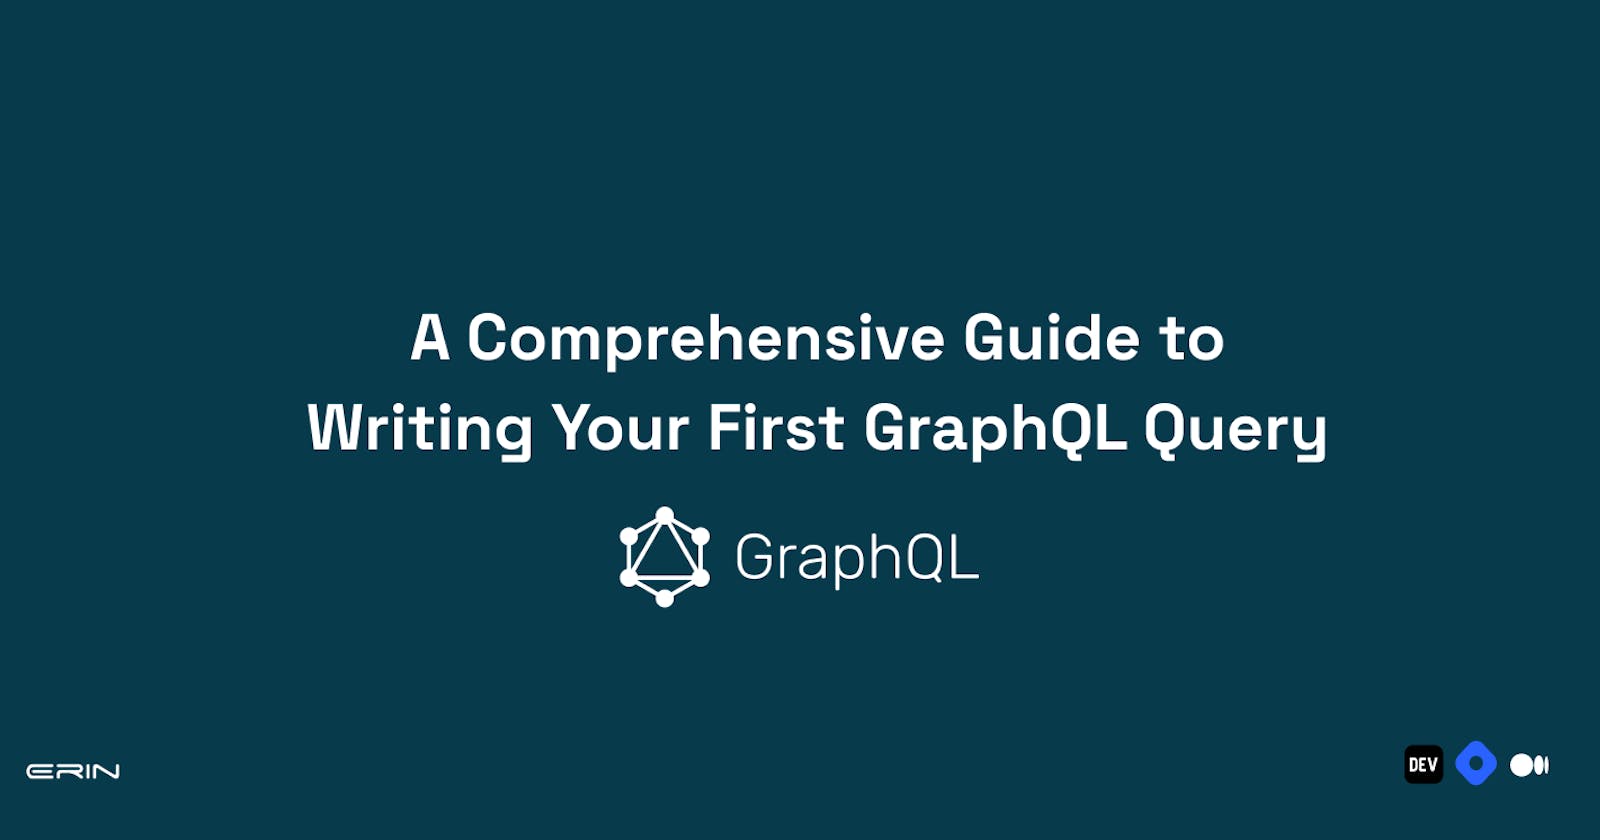 A Comprehensive Guide to Writing Your First GraphQL Query